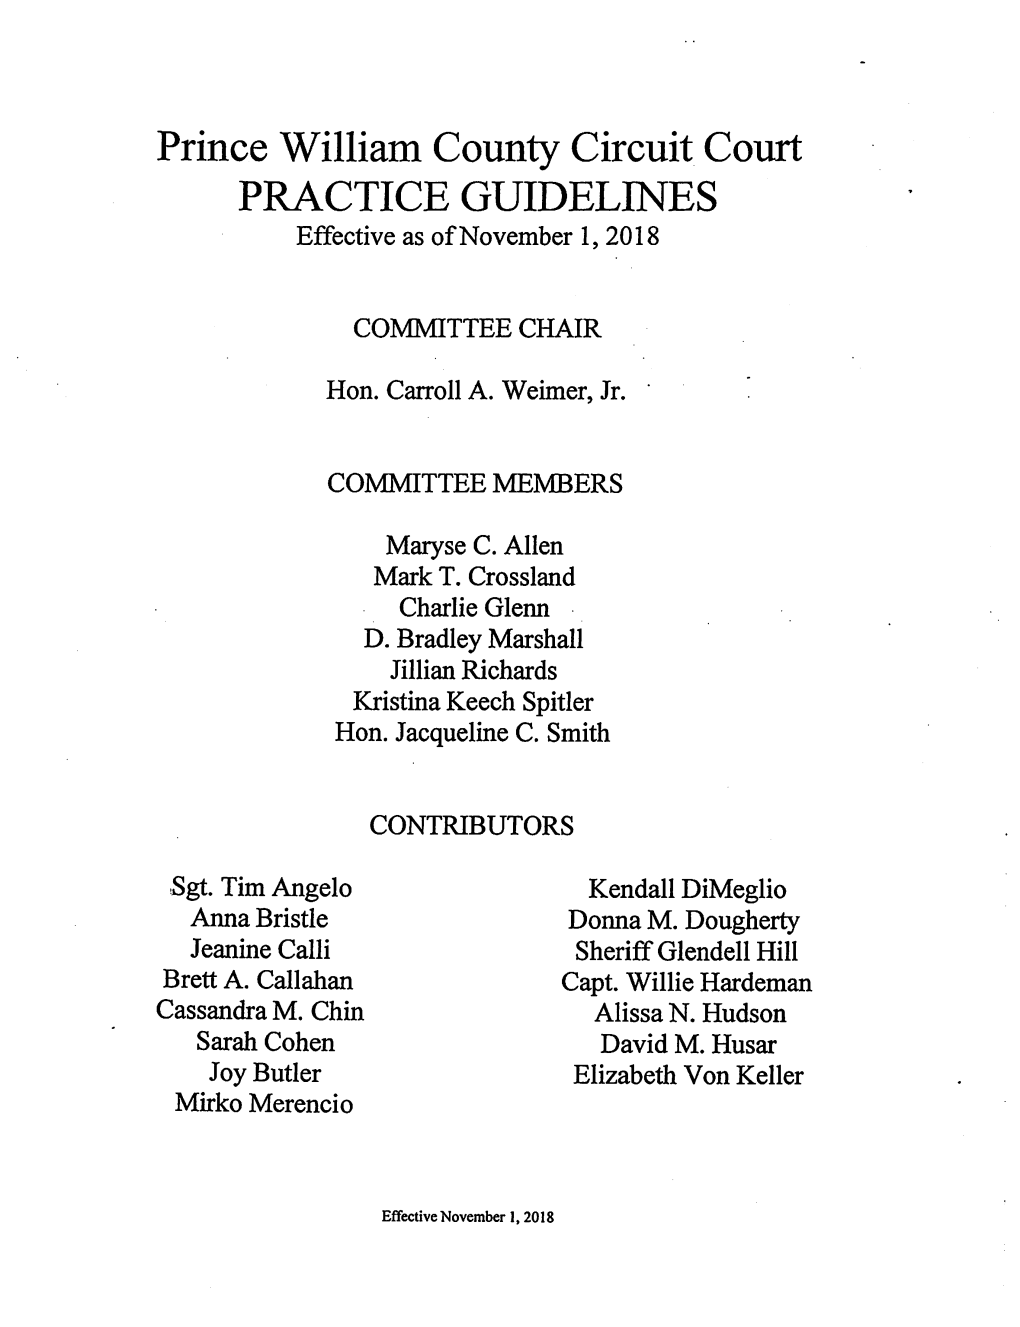 Prince William County Circuit Court PRACTICE GUIDELINES Effective As of November 1,2018